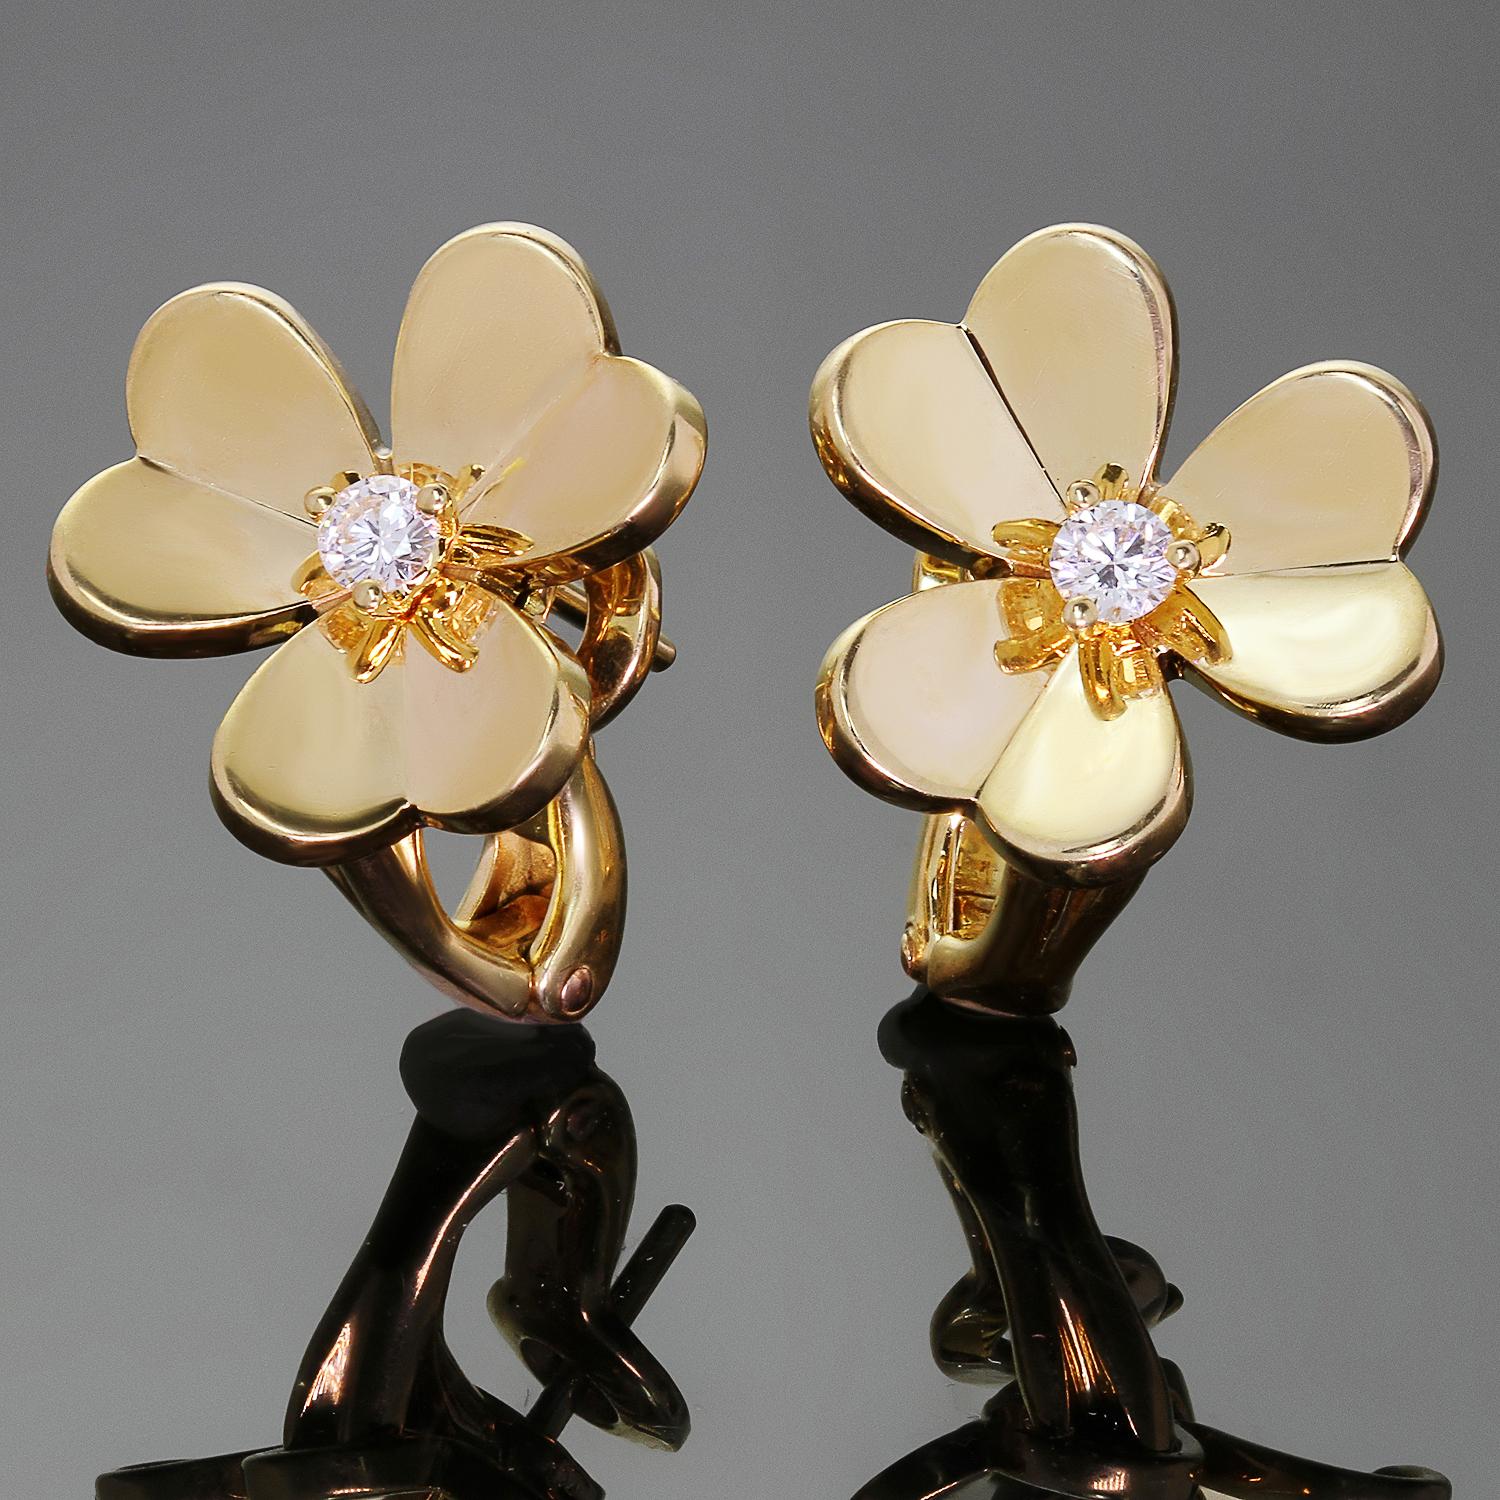 These elegant authentic Van Cleef and Arpels earrings from the iconic Frivole collection features a flower design crafted in 18k yellow gold and set with 2 round brilliant D-E-F VVS1-VVS2 diamonds weighing an estimated 0.16 carats. This is the small